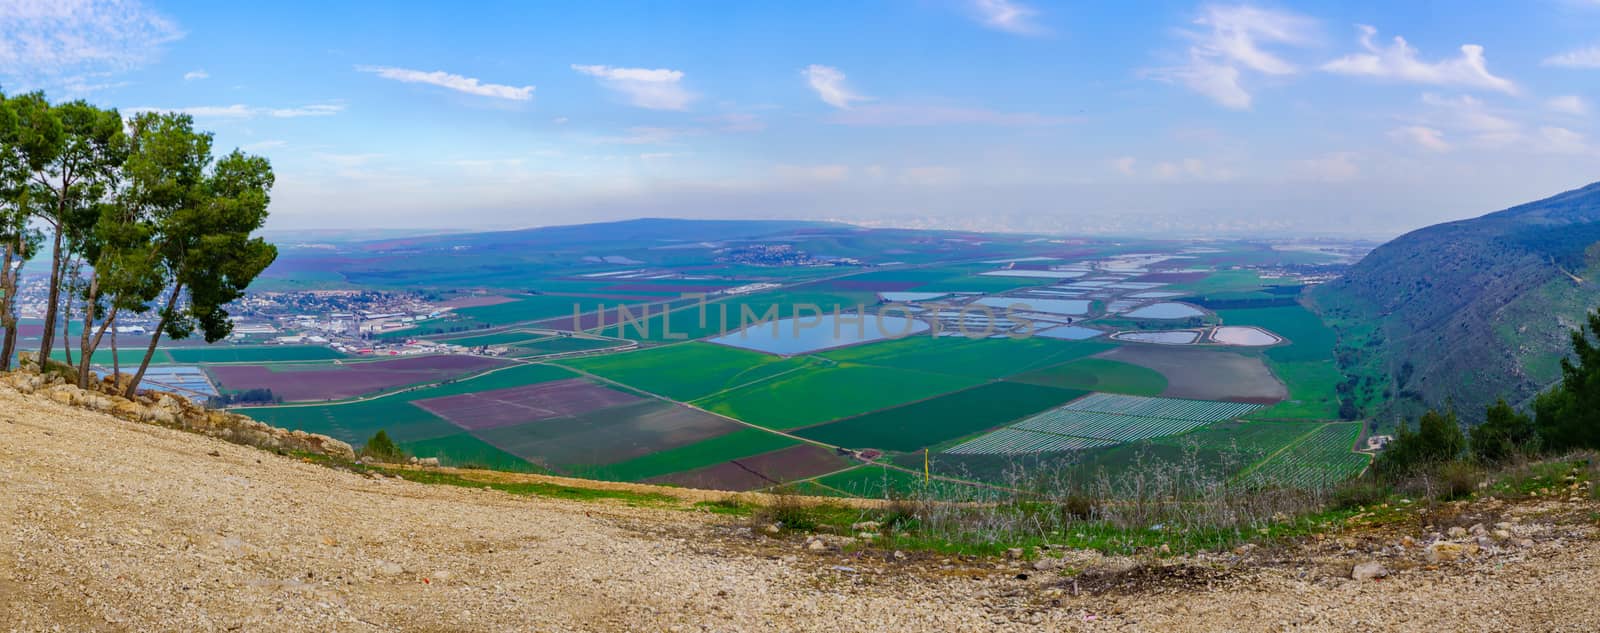 Panorama of landscape and countryside in the eastern Jezreel Val by RnDmS